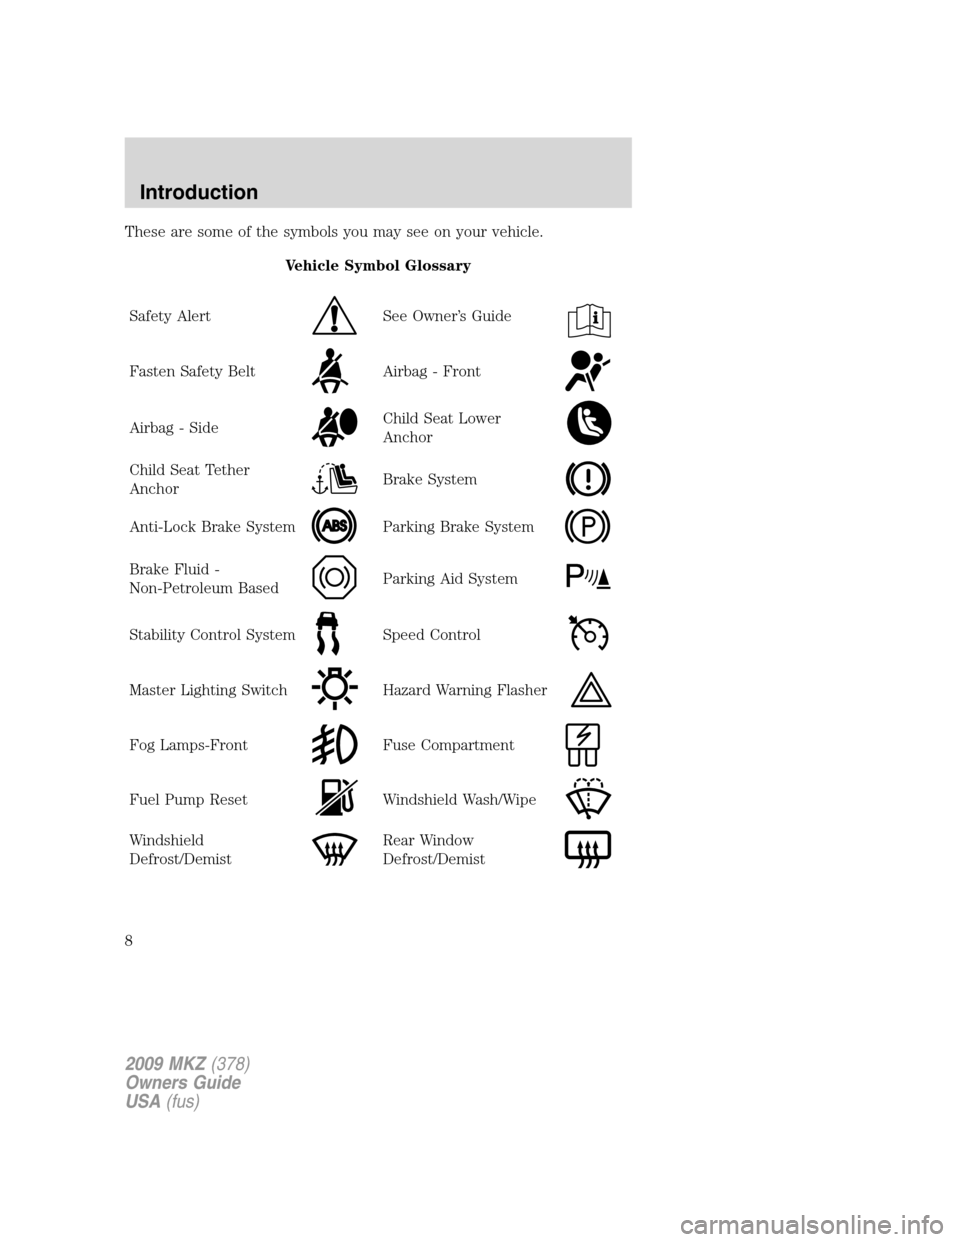 LINCOLN MKZ 2009  Owners Manual These are some of the symbols you may see on your vehicle.
Vehicle Symbol Glossary
Safety Alert
See Owner’s Guide
Fasten Safety BeltAirbag - Front
Airbag - SideChild Seat Lower
Anchor
Child Seat Tet